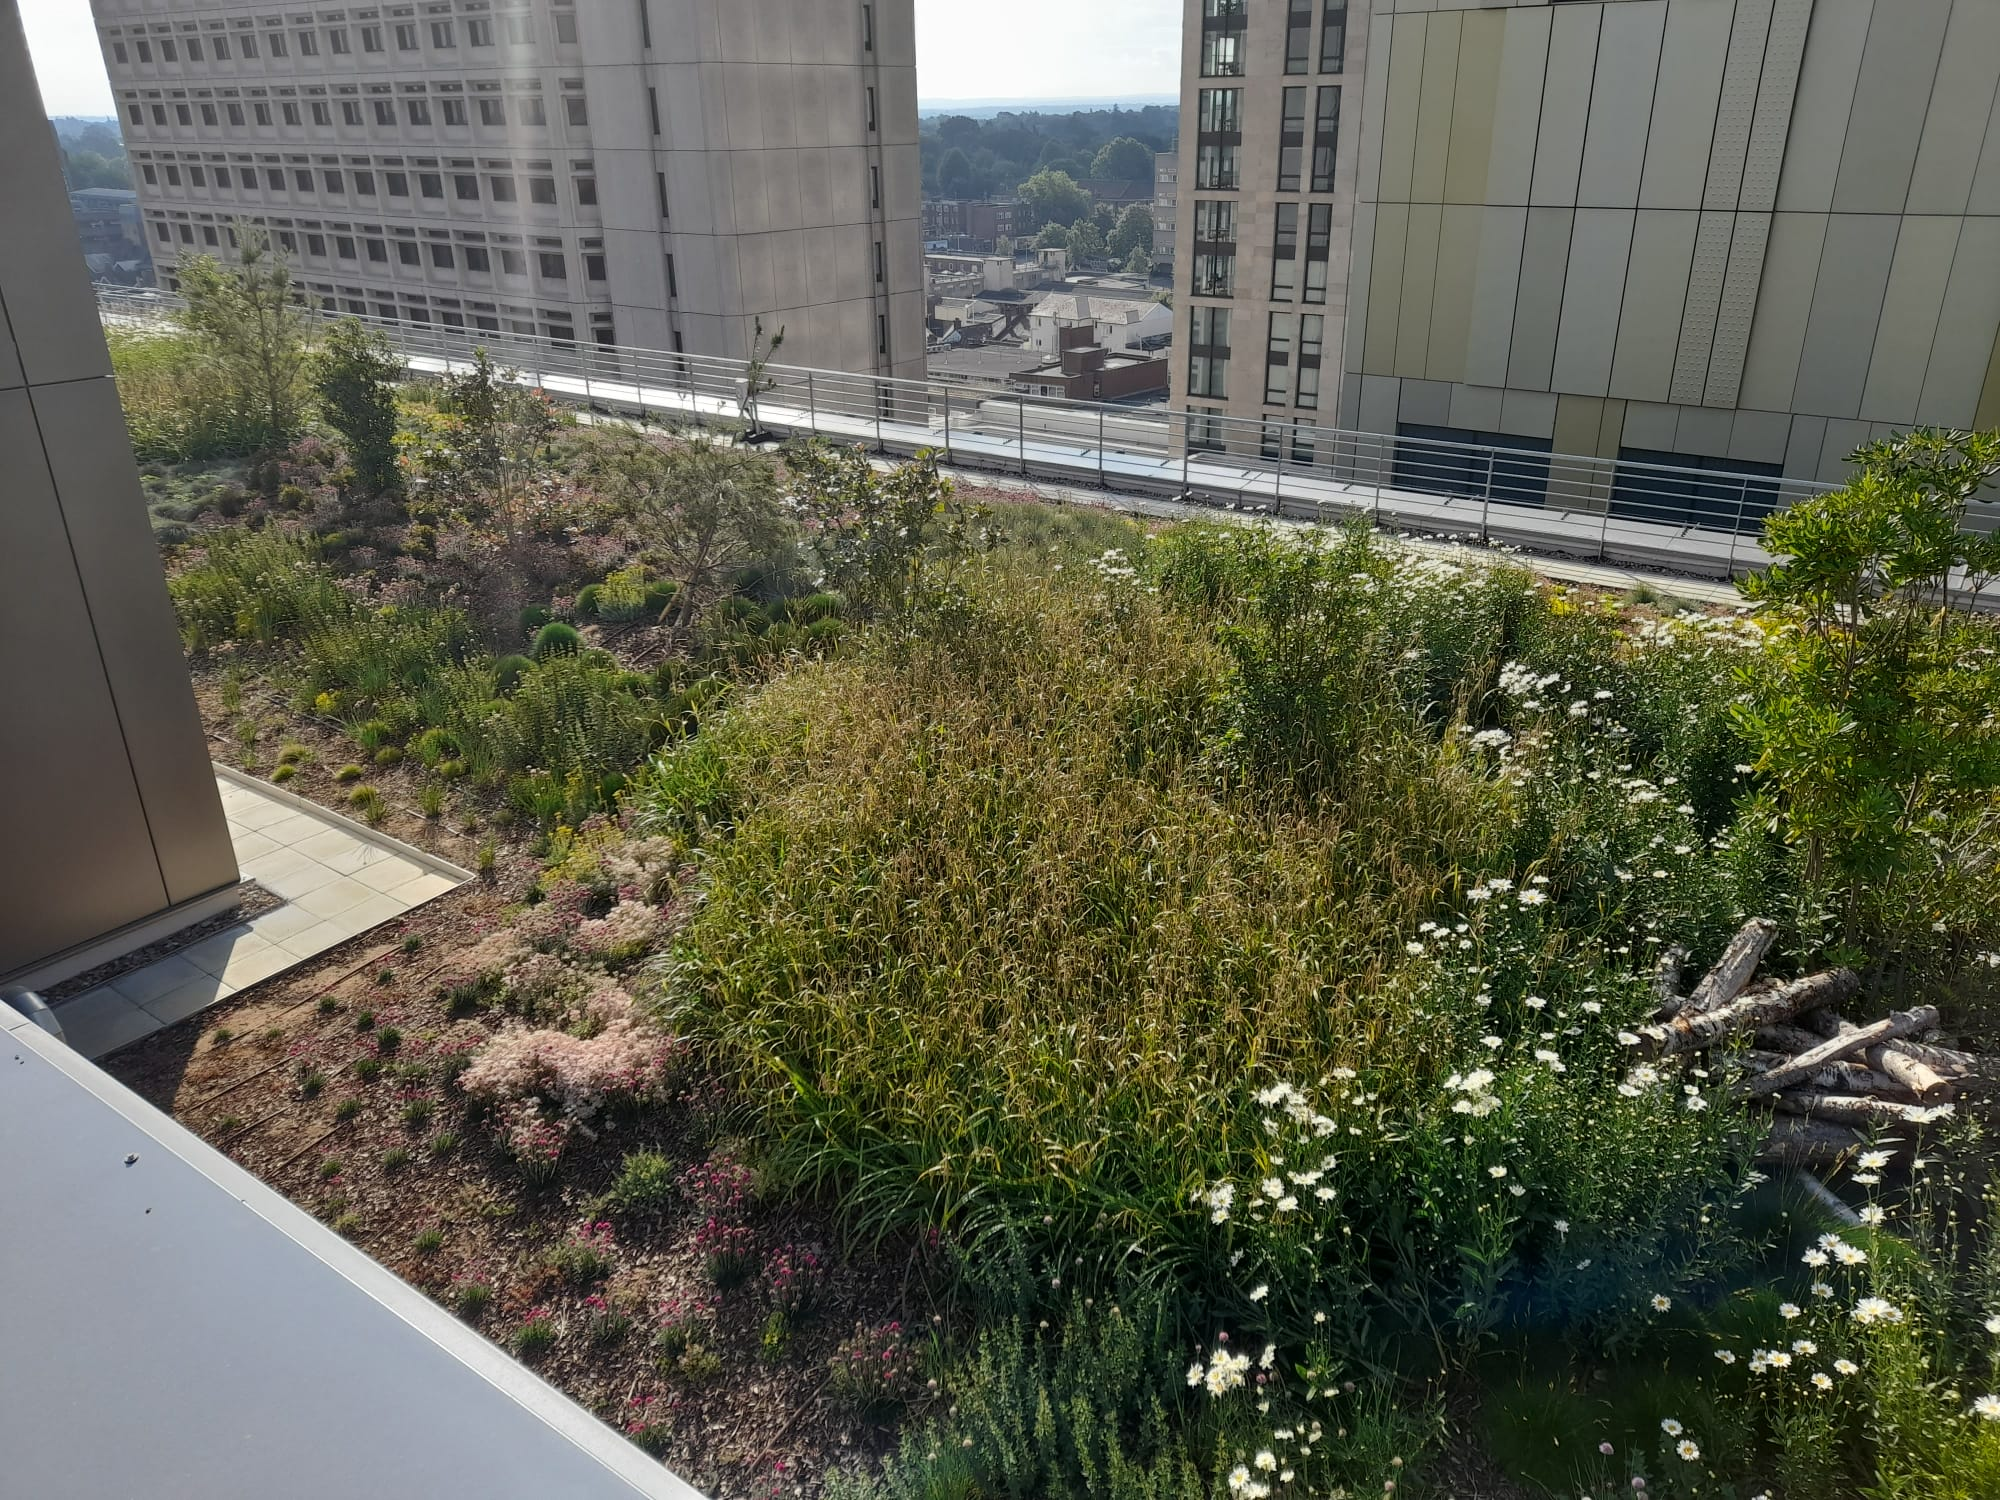 intensive green roof overlooked by a hotel building